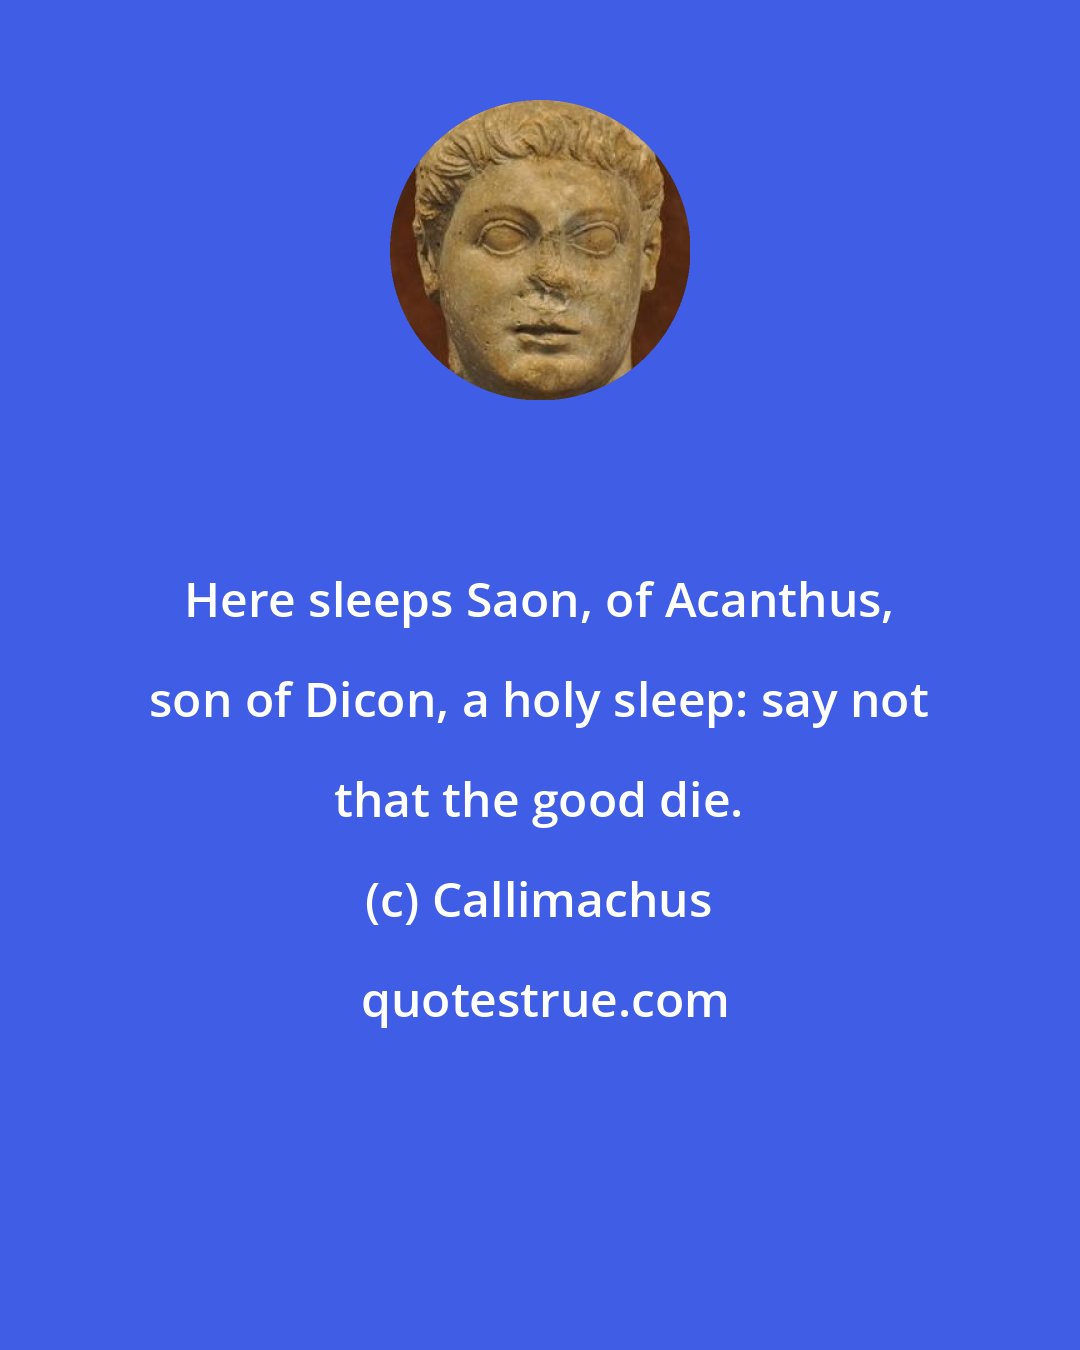 Callimachus: Here sleeps Saon, of Acanthus, son of Dicon, a holy sleep: say not that the good die.